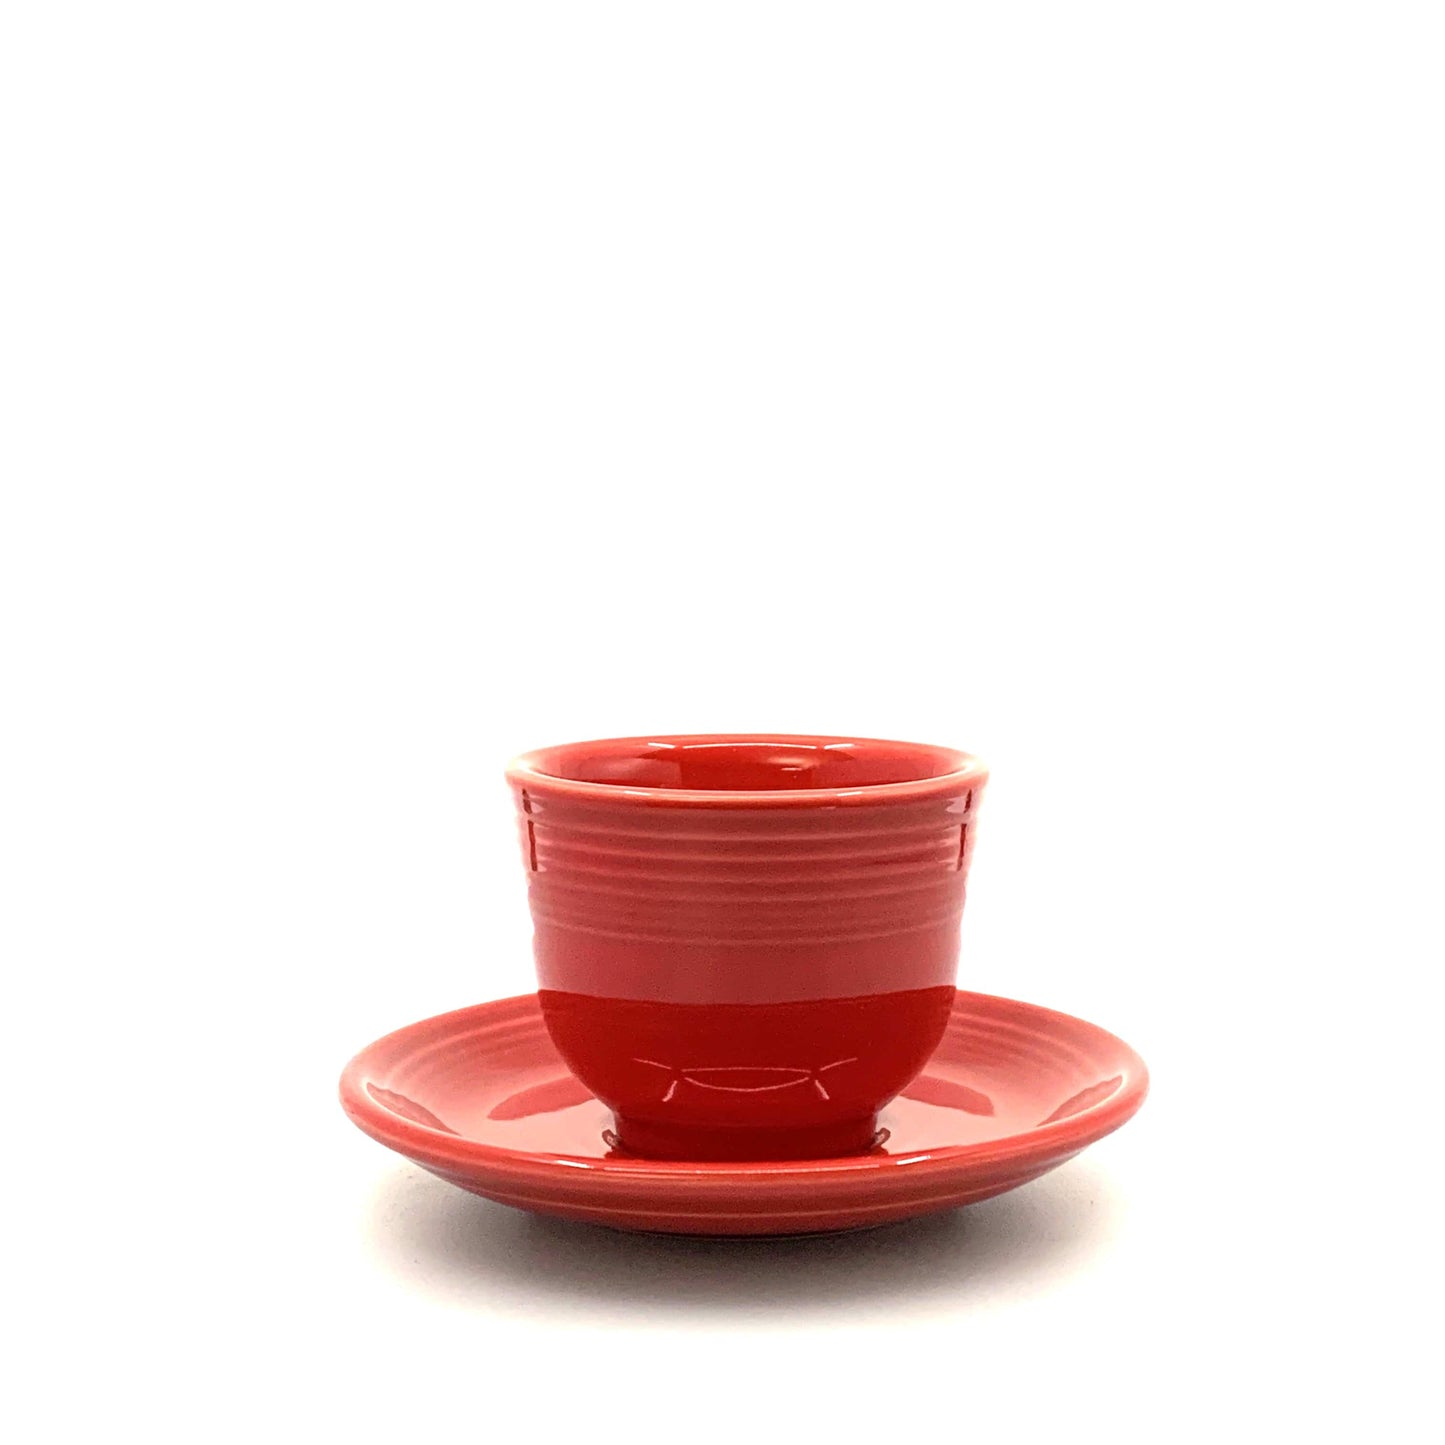 Fiesta Red Replacement Tea Coffee Cup and Saucer Set Homer Laughlin Co USA.